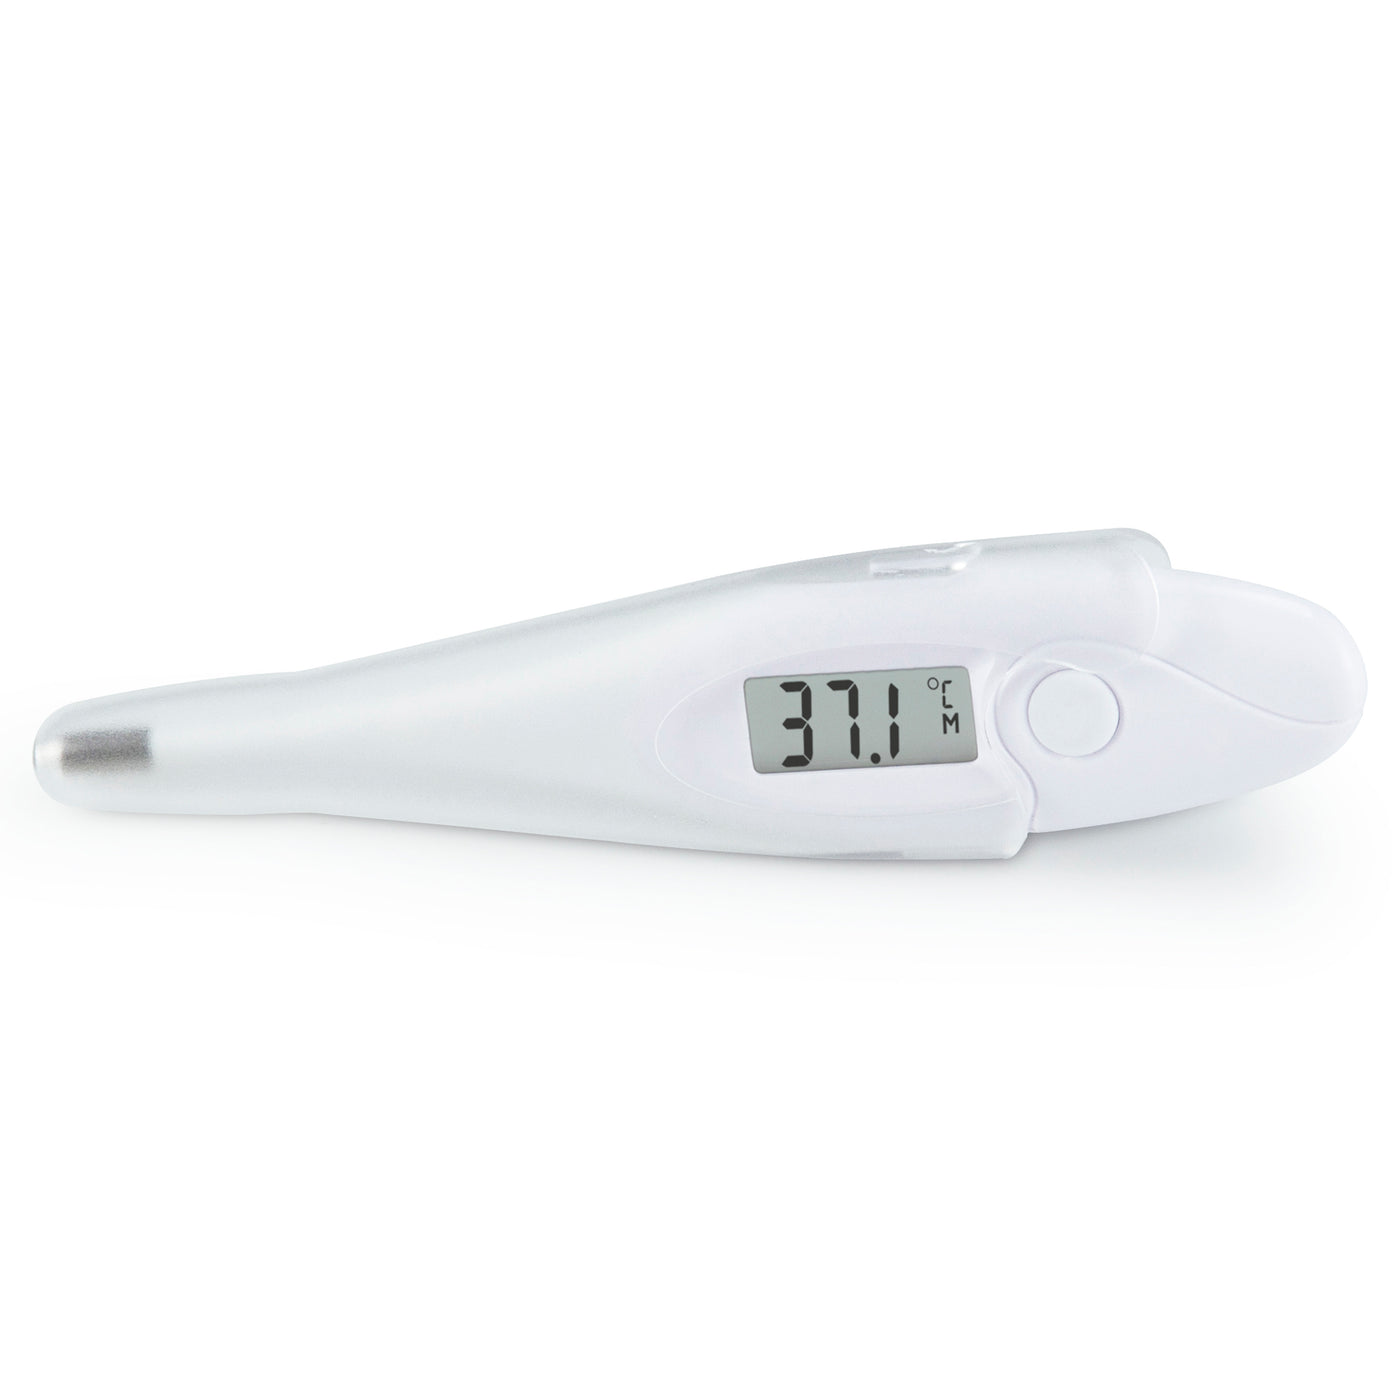 Alecto BC-04 - Baby thermometerset 2-delig, wit